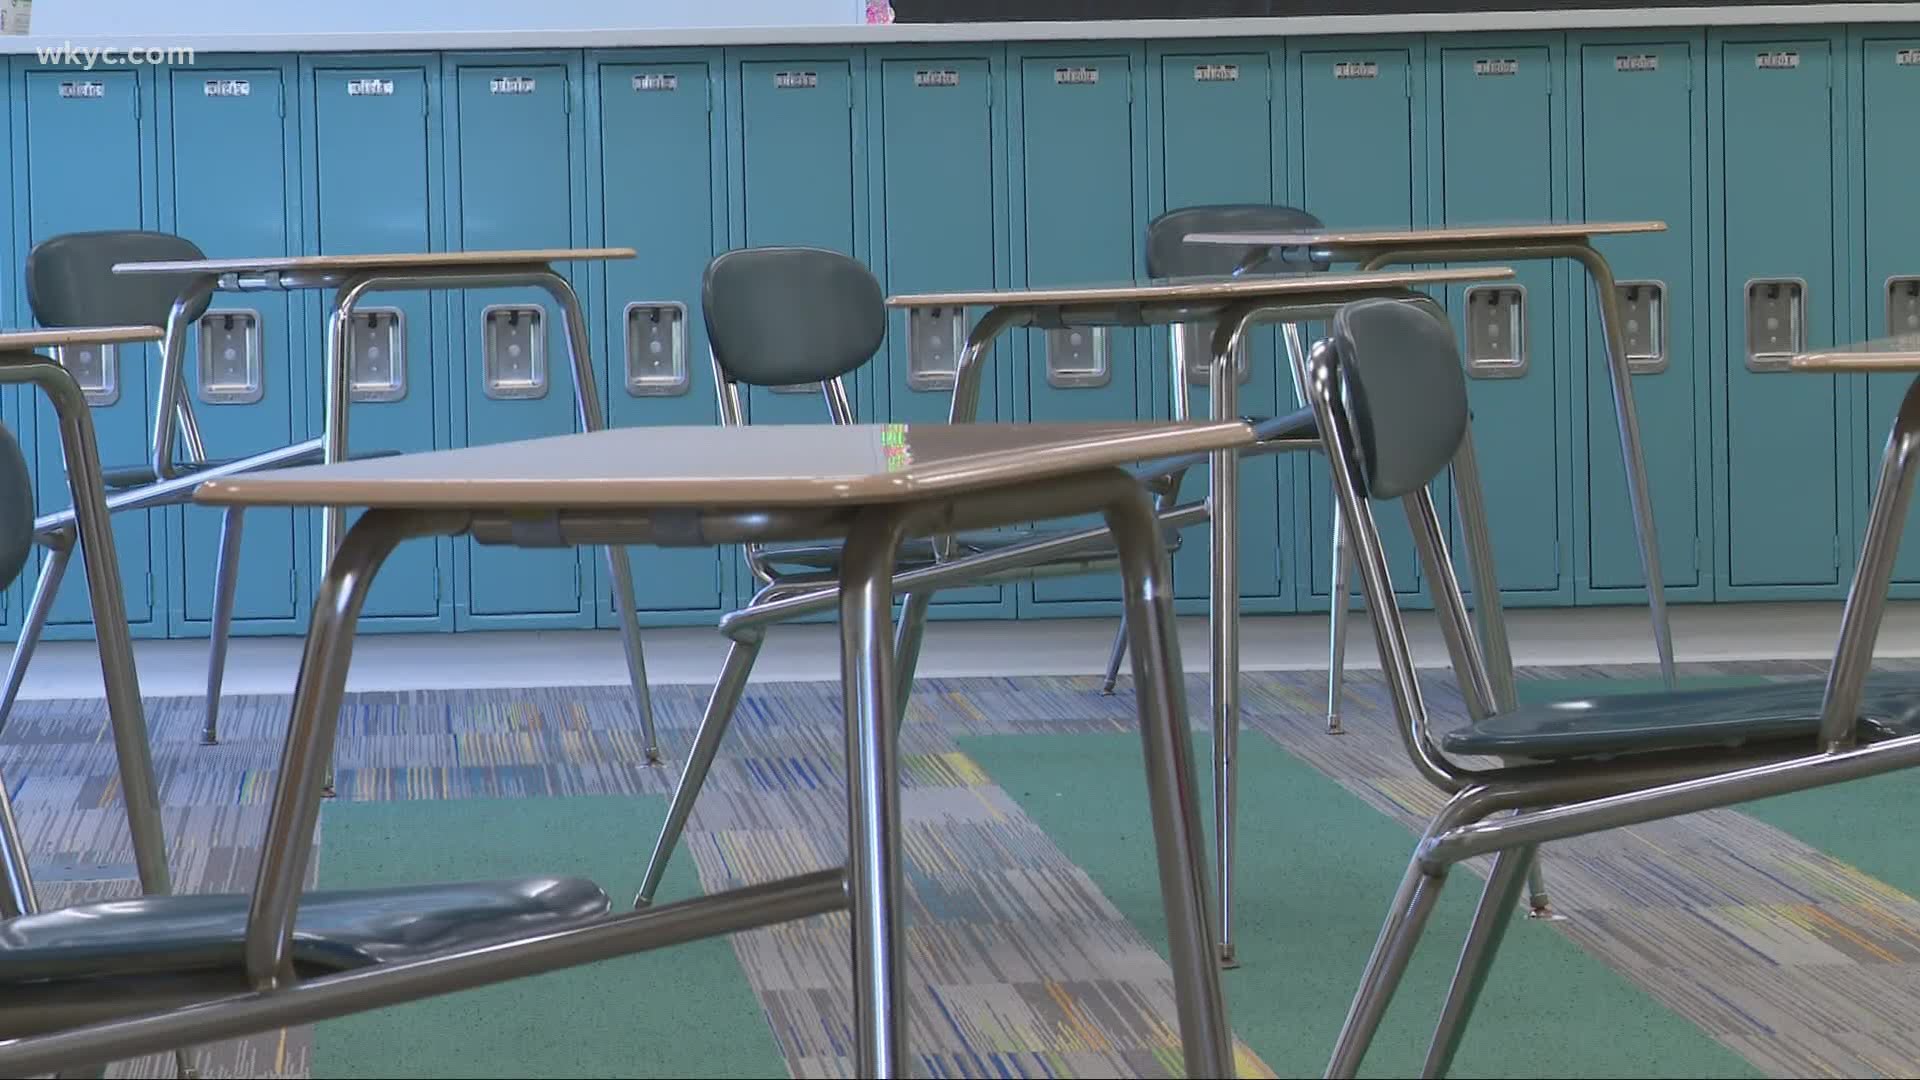 We're getting a first-hand look inside of a school building as teachers and students prepare for the new academic year. Tiffany Tarpley reports.